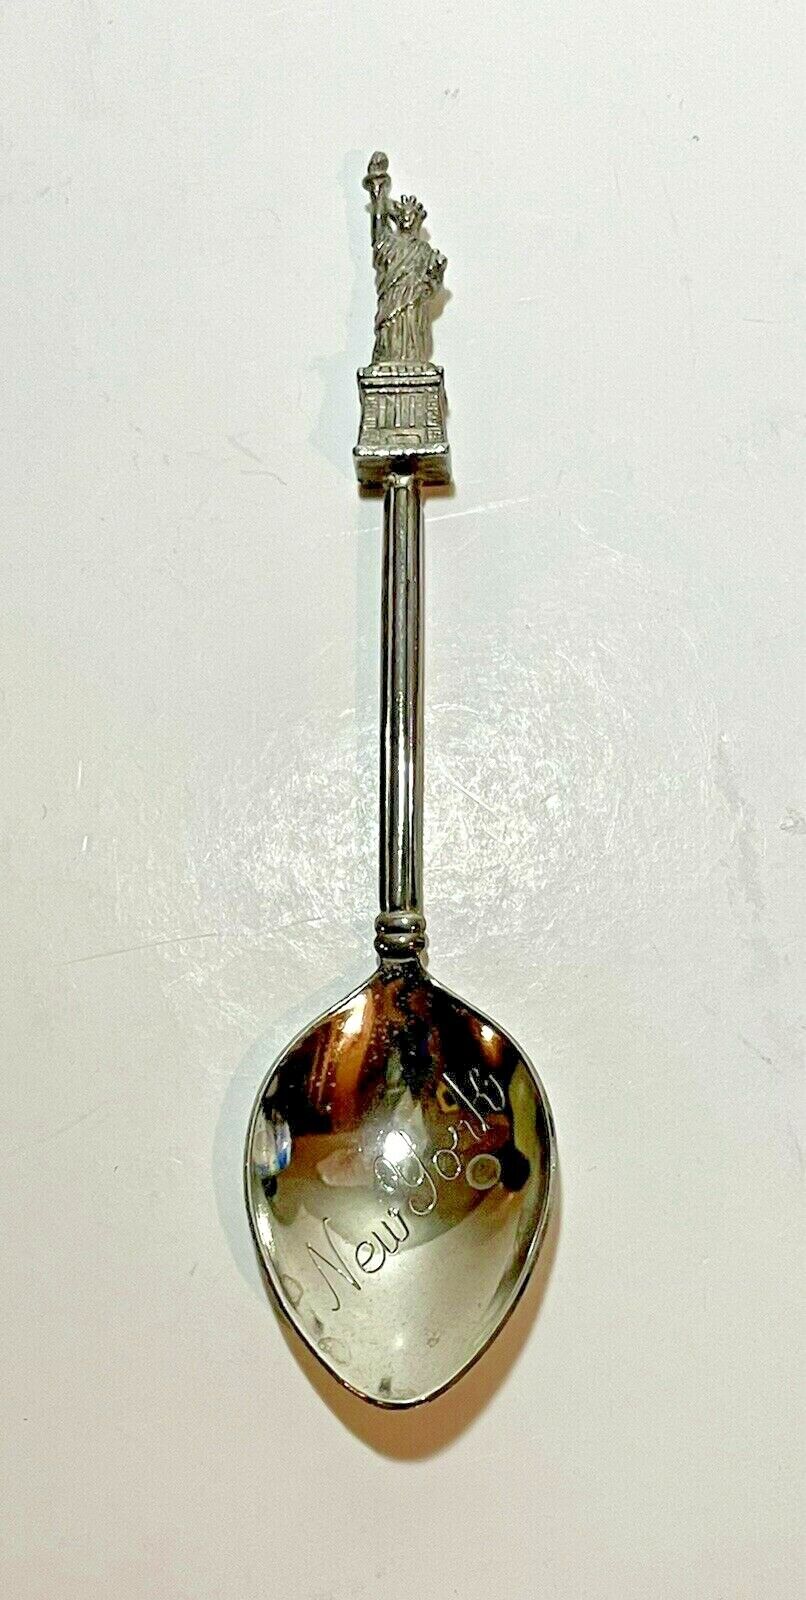 Vintage 1982 Silverplate Souvenir Spoon - Statue of Liberty, NYC (Clamer)